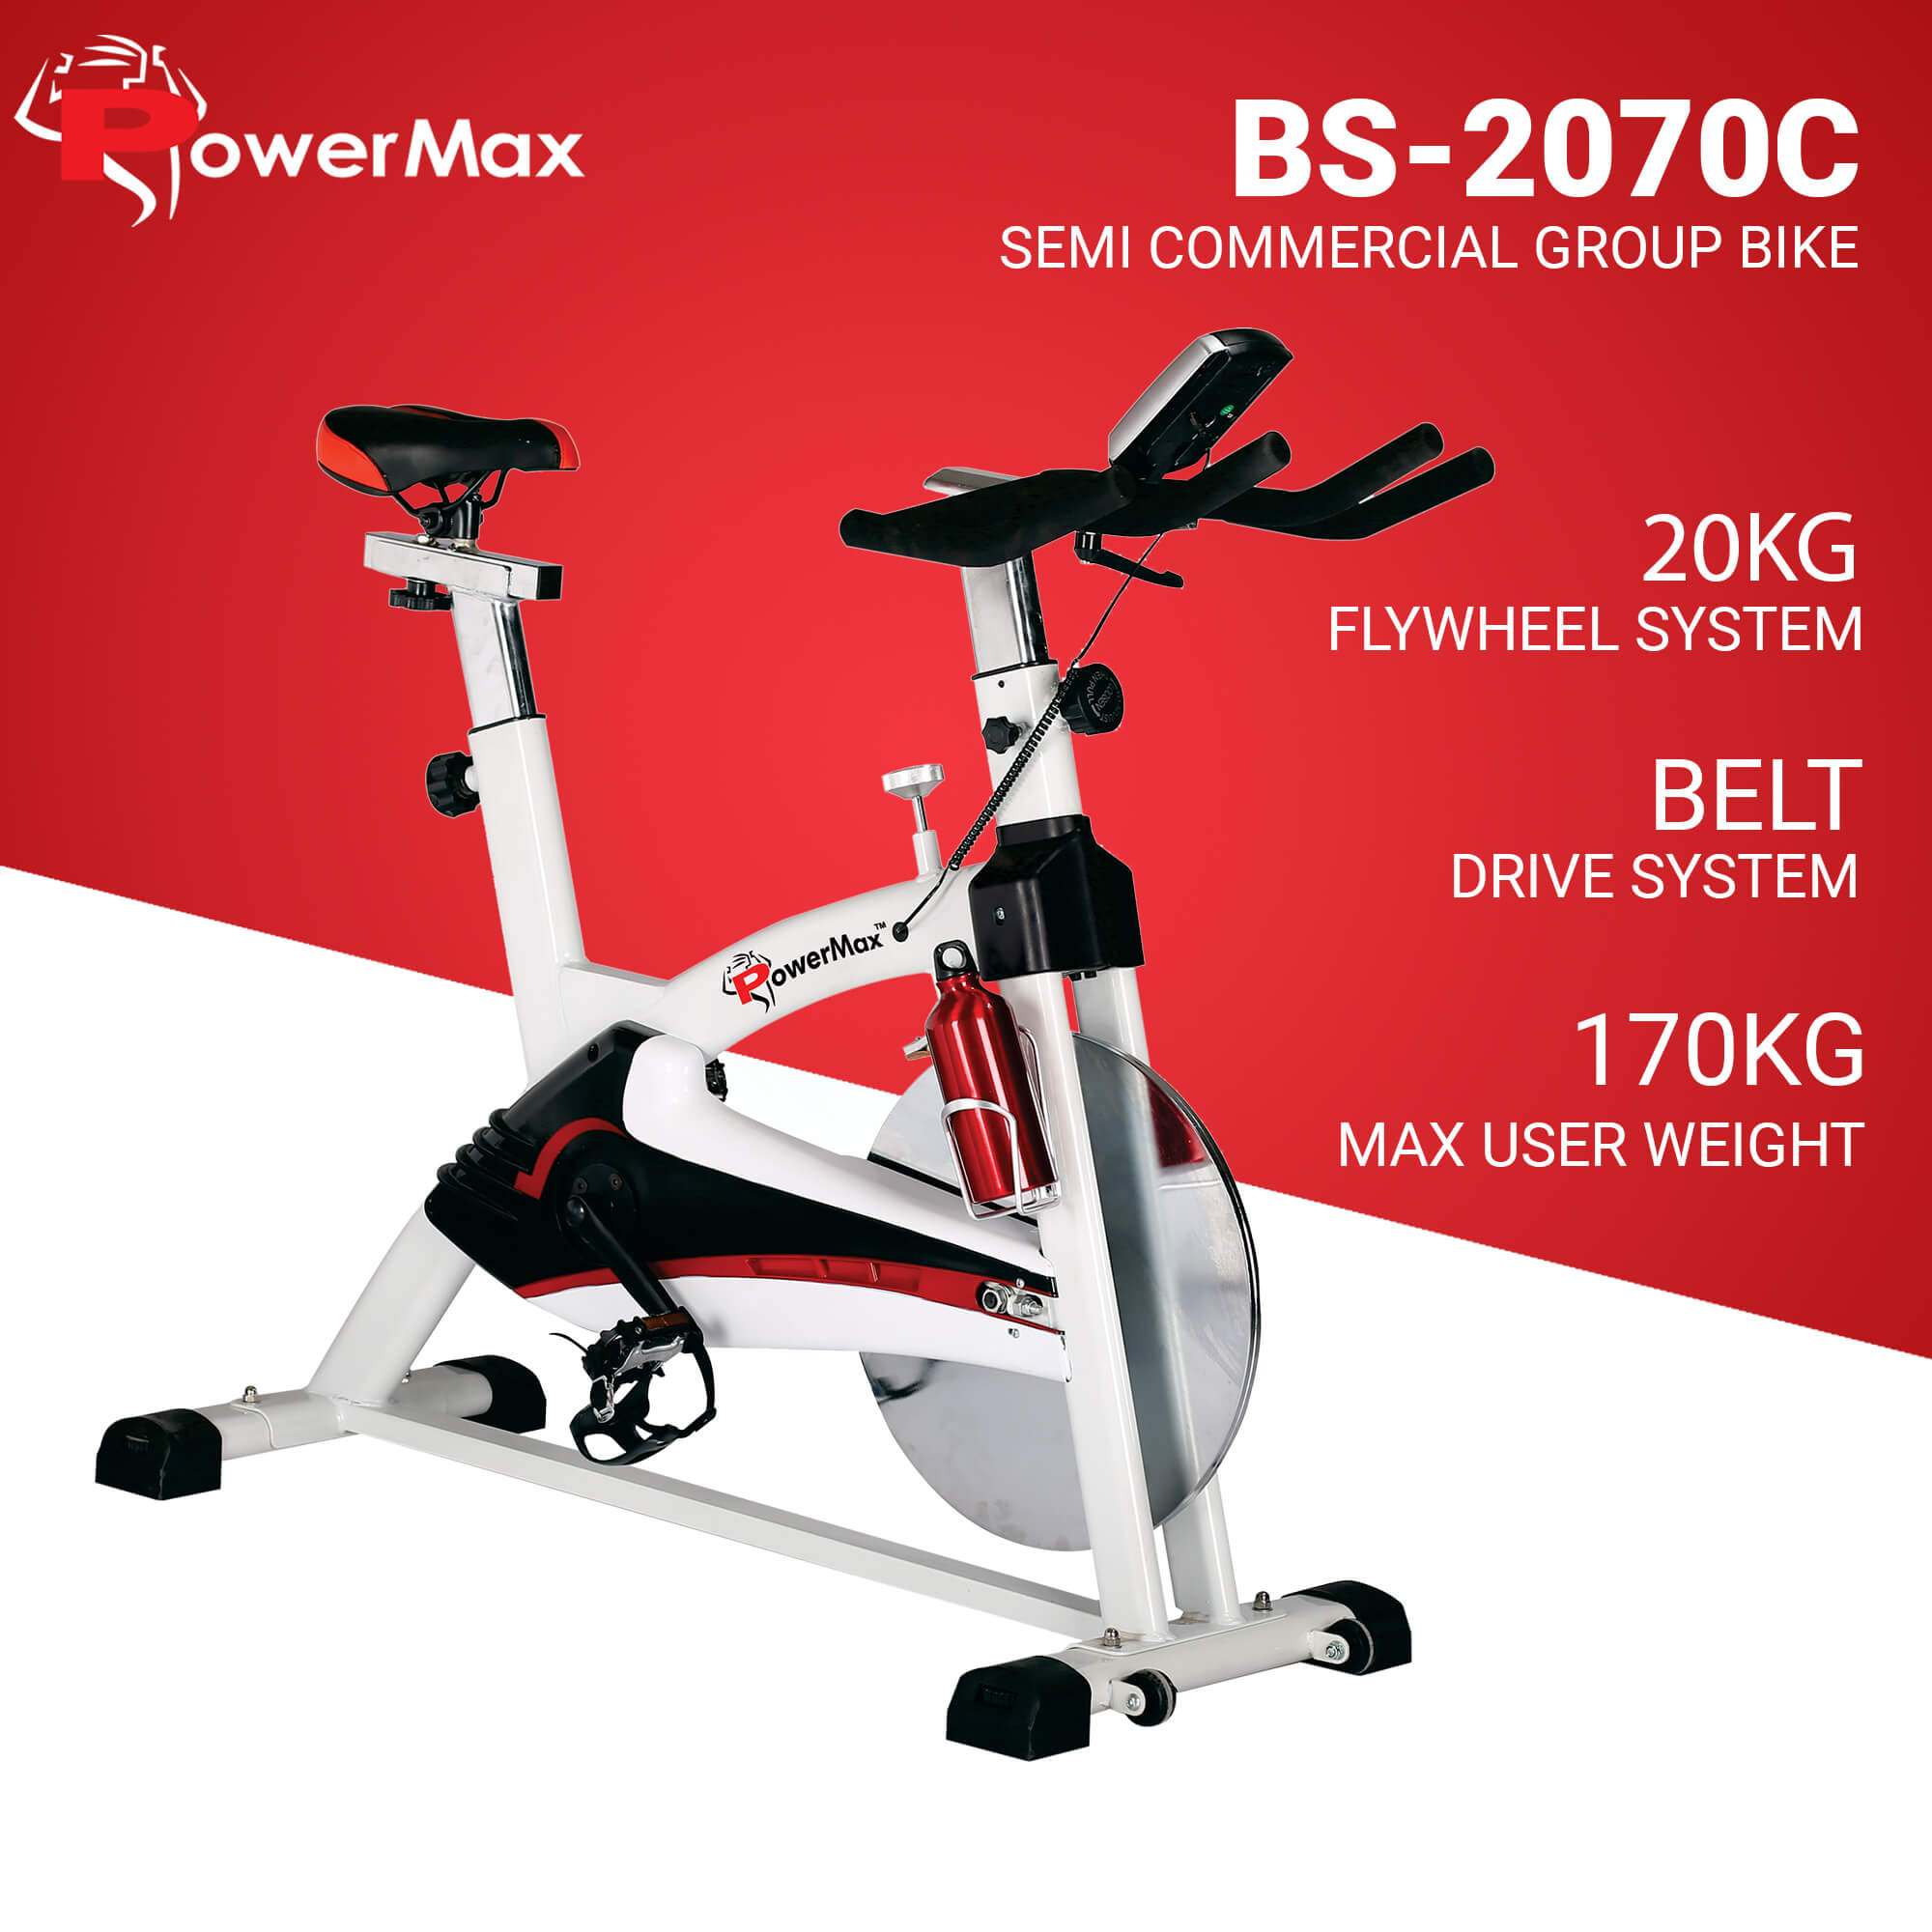 BS-2070C Semi Commercial Group Bike